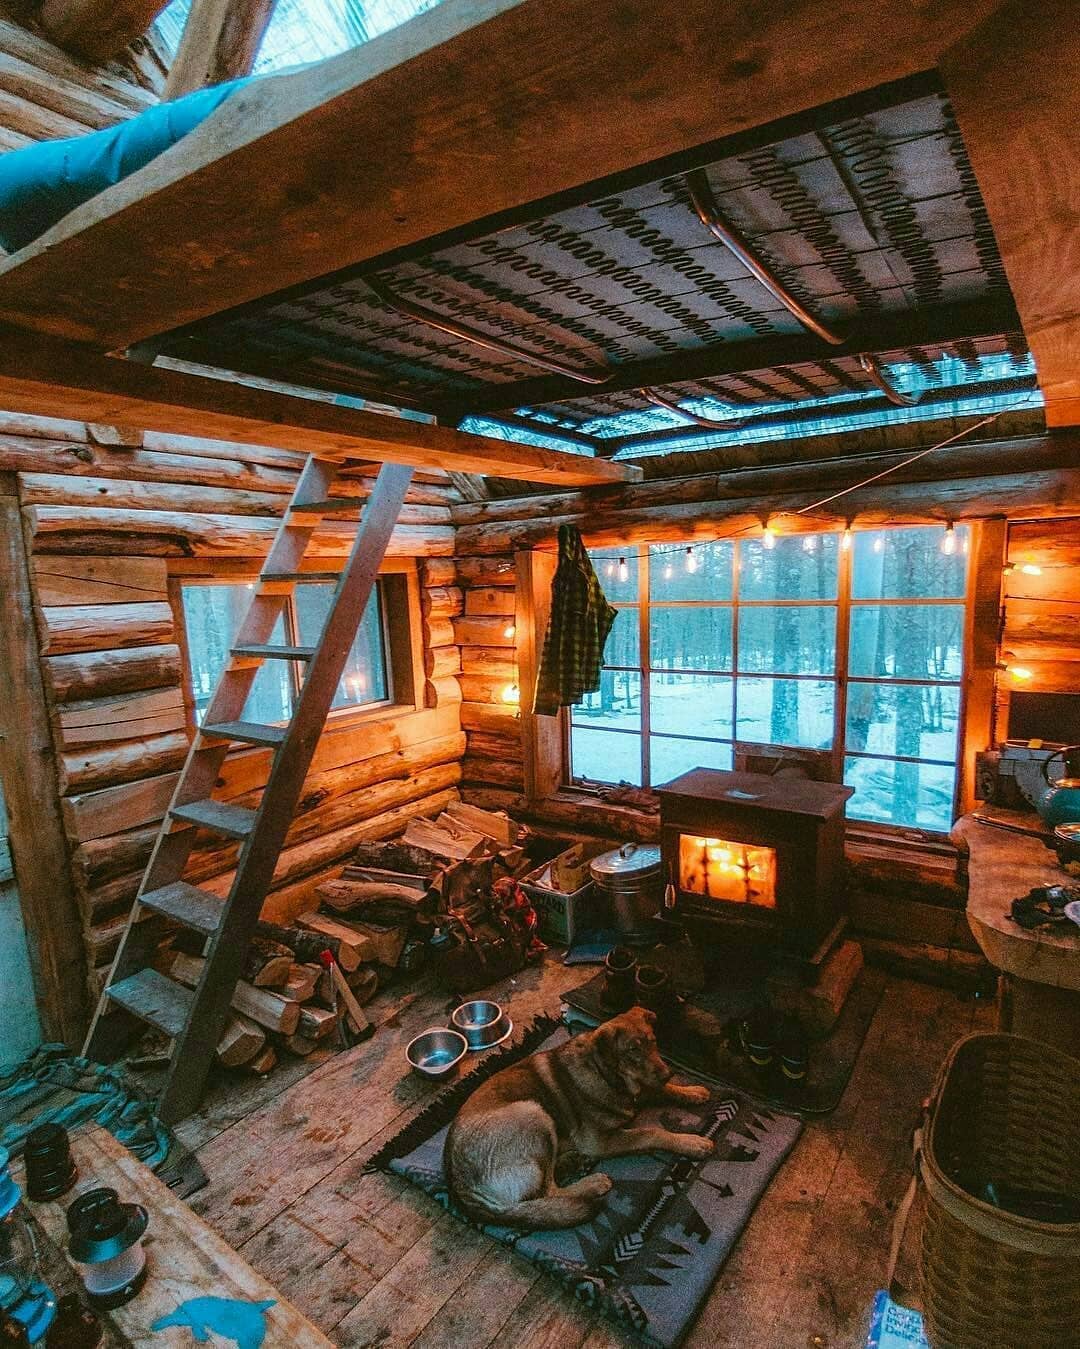 Survival Camping World on X: Cabins are like paradise. Follow:  @SurvivalCampin9 #Camping #campinglife #Survival #survivalist #outdoors  #hiking #adventure #nature #wilderness #shelter #survivalcraft #bushcraft  #bushcrafting #shelter #travel